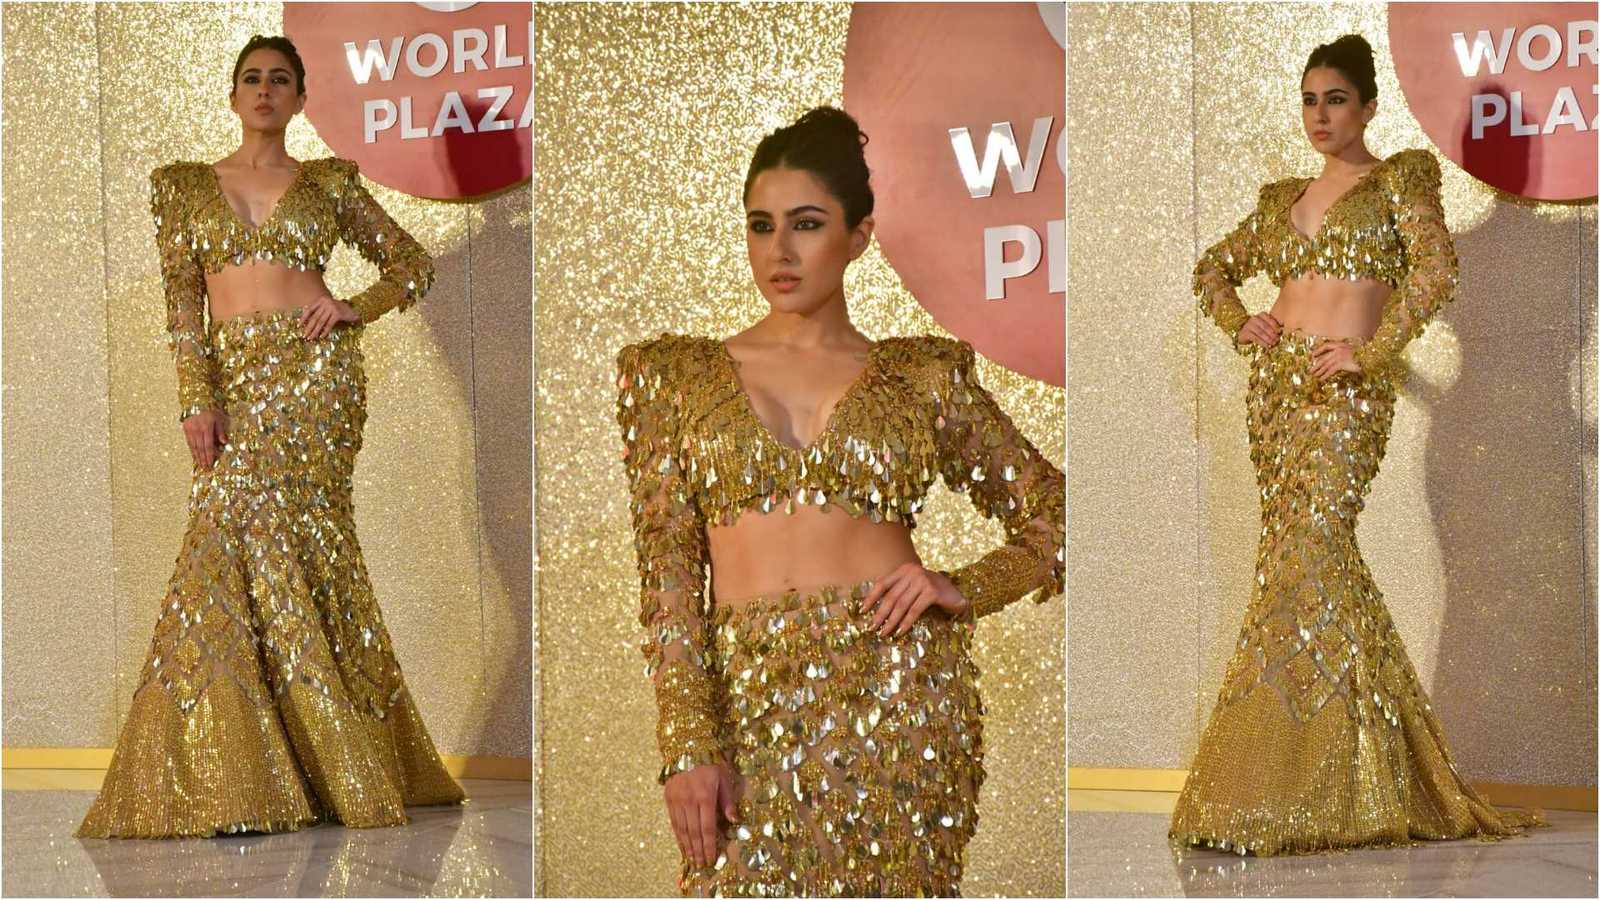 Bollywood Red gold glittery tales of Jio World Plaza event - Bollywood Red  gold glittery tales of Jio World Plaza event 